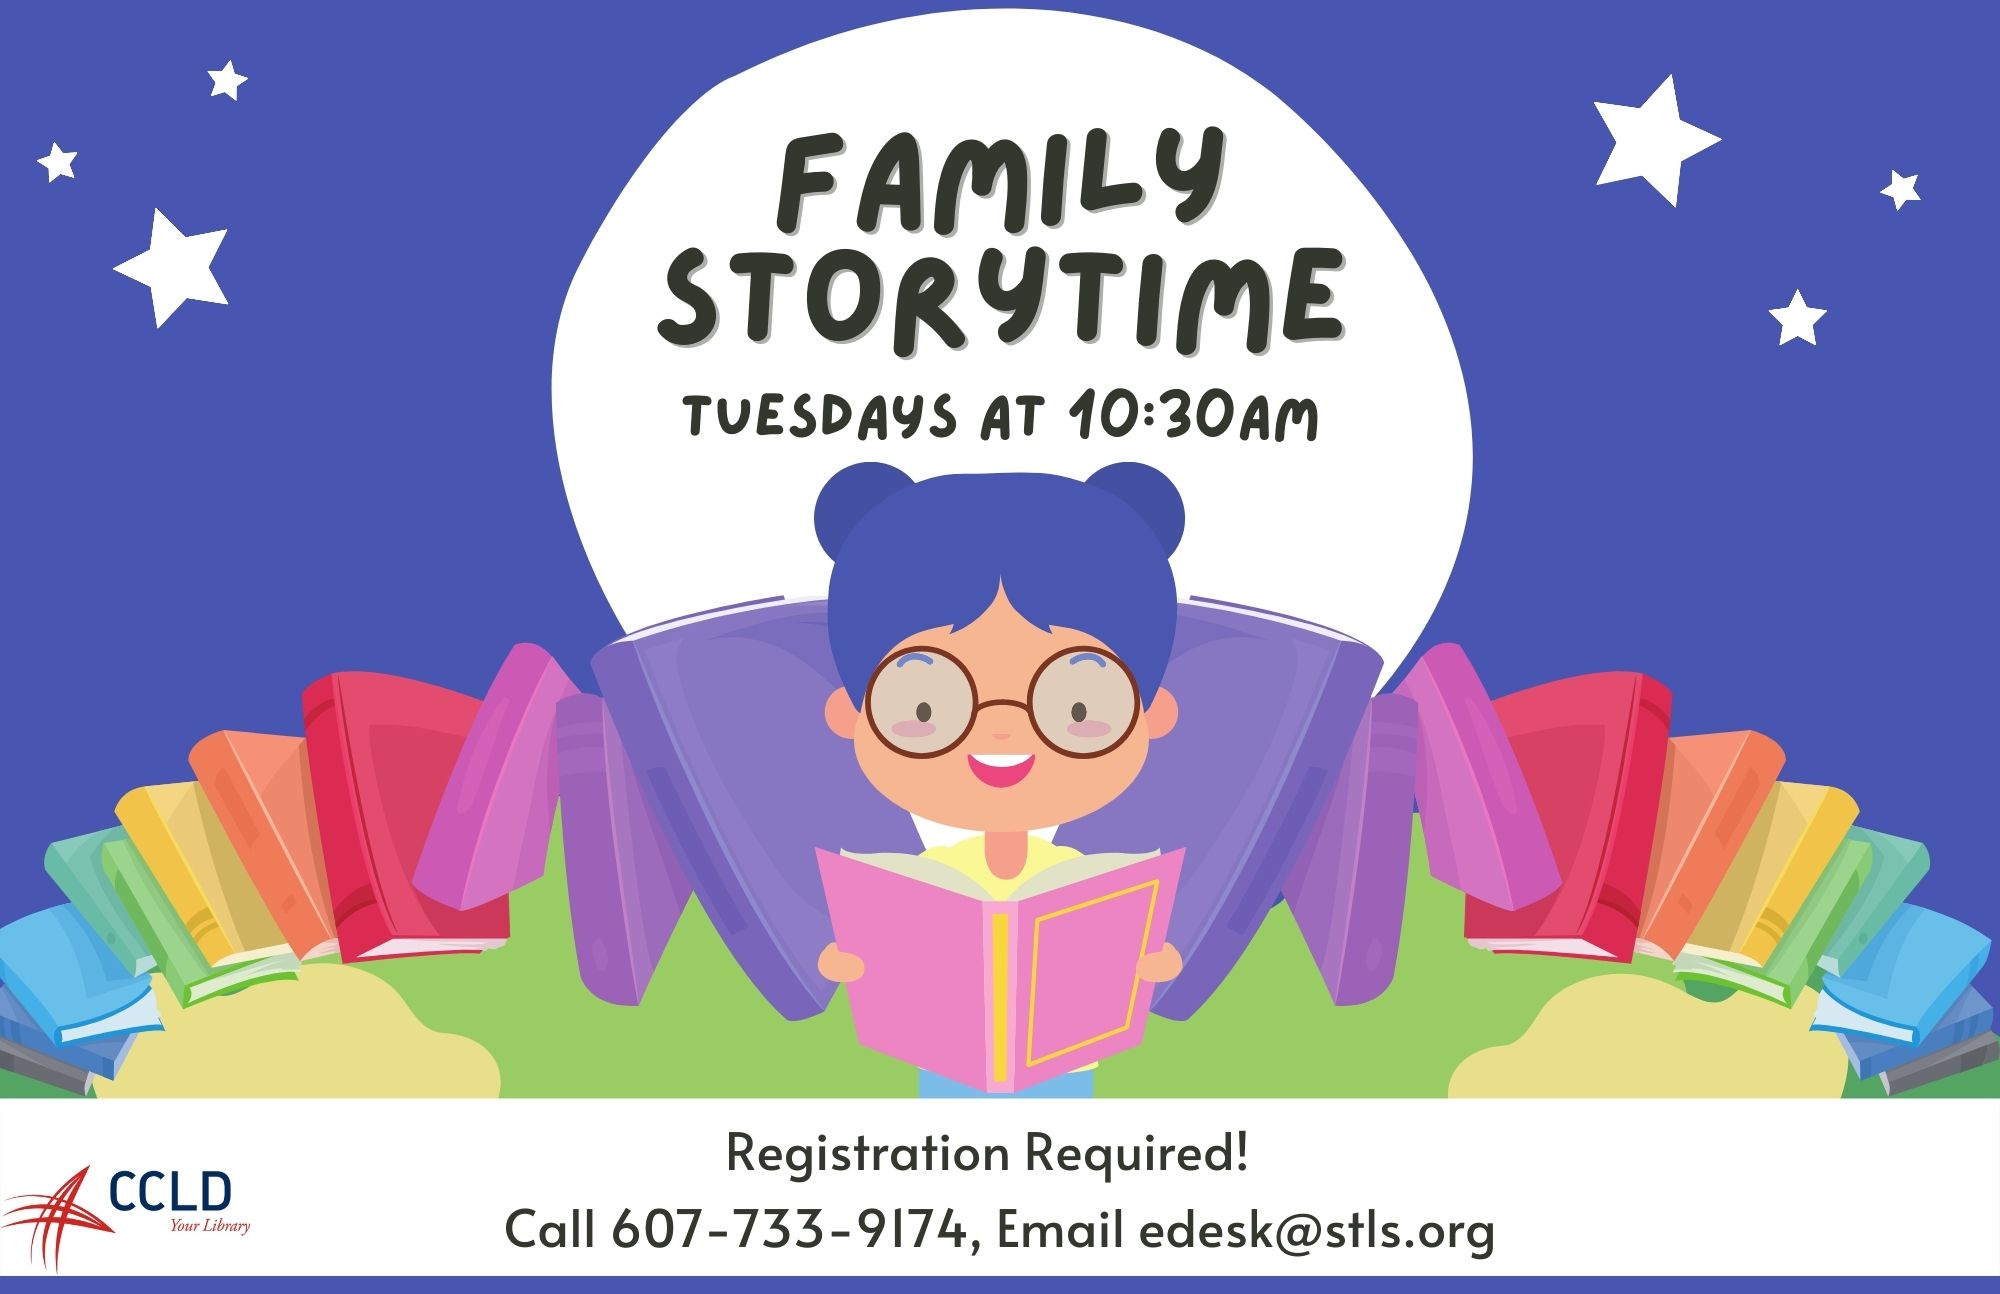 Family storytime is back at the Steele Memorial Library.  Join us for stories, rhymes, and songs!

Call 607-733-9173 or email edesk@stls.org to register.